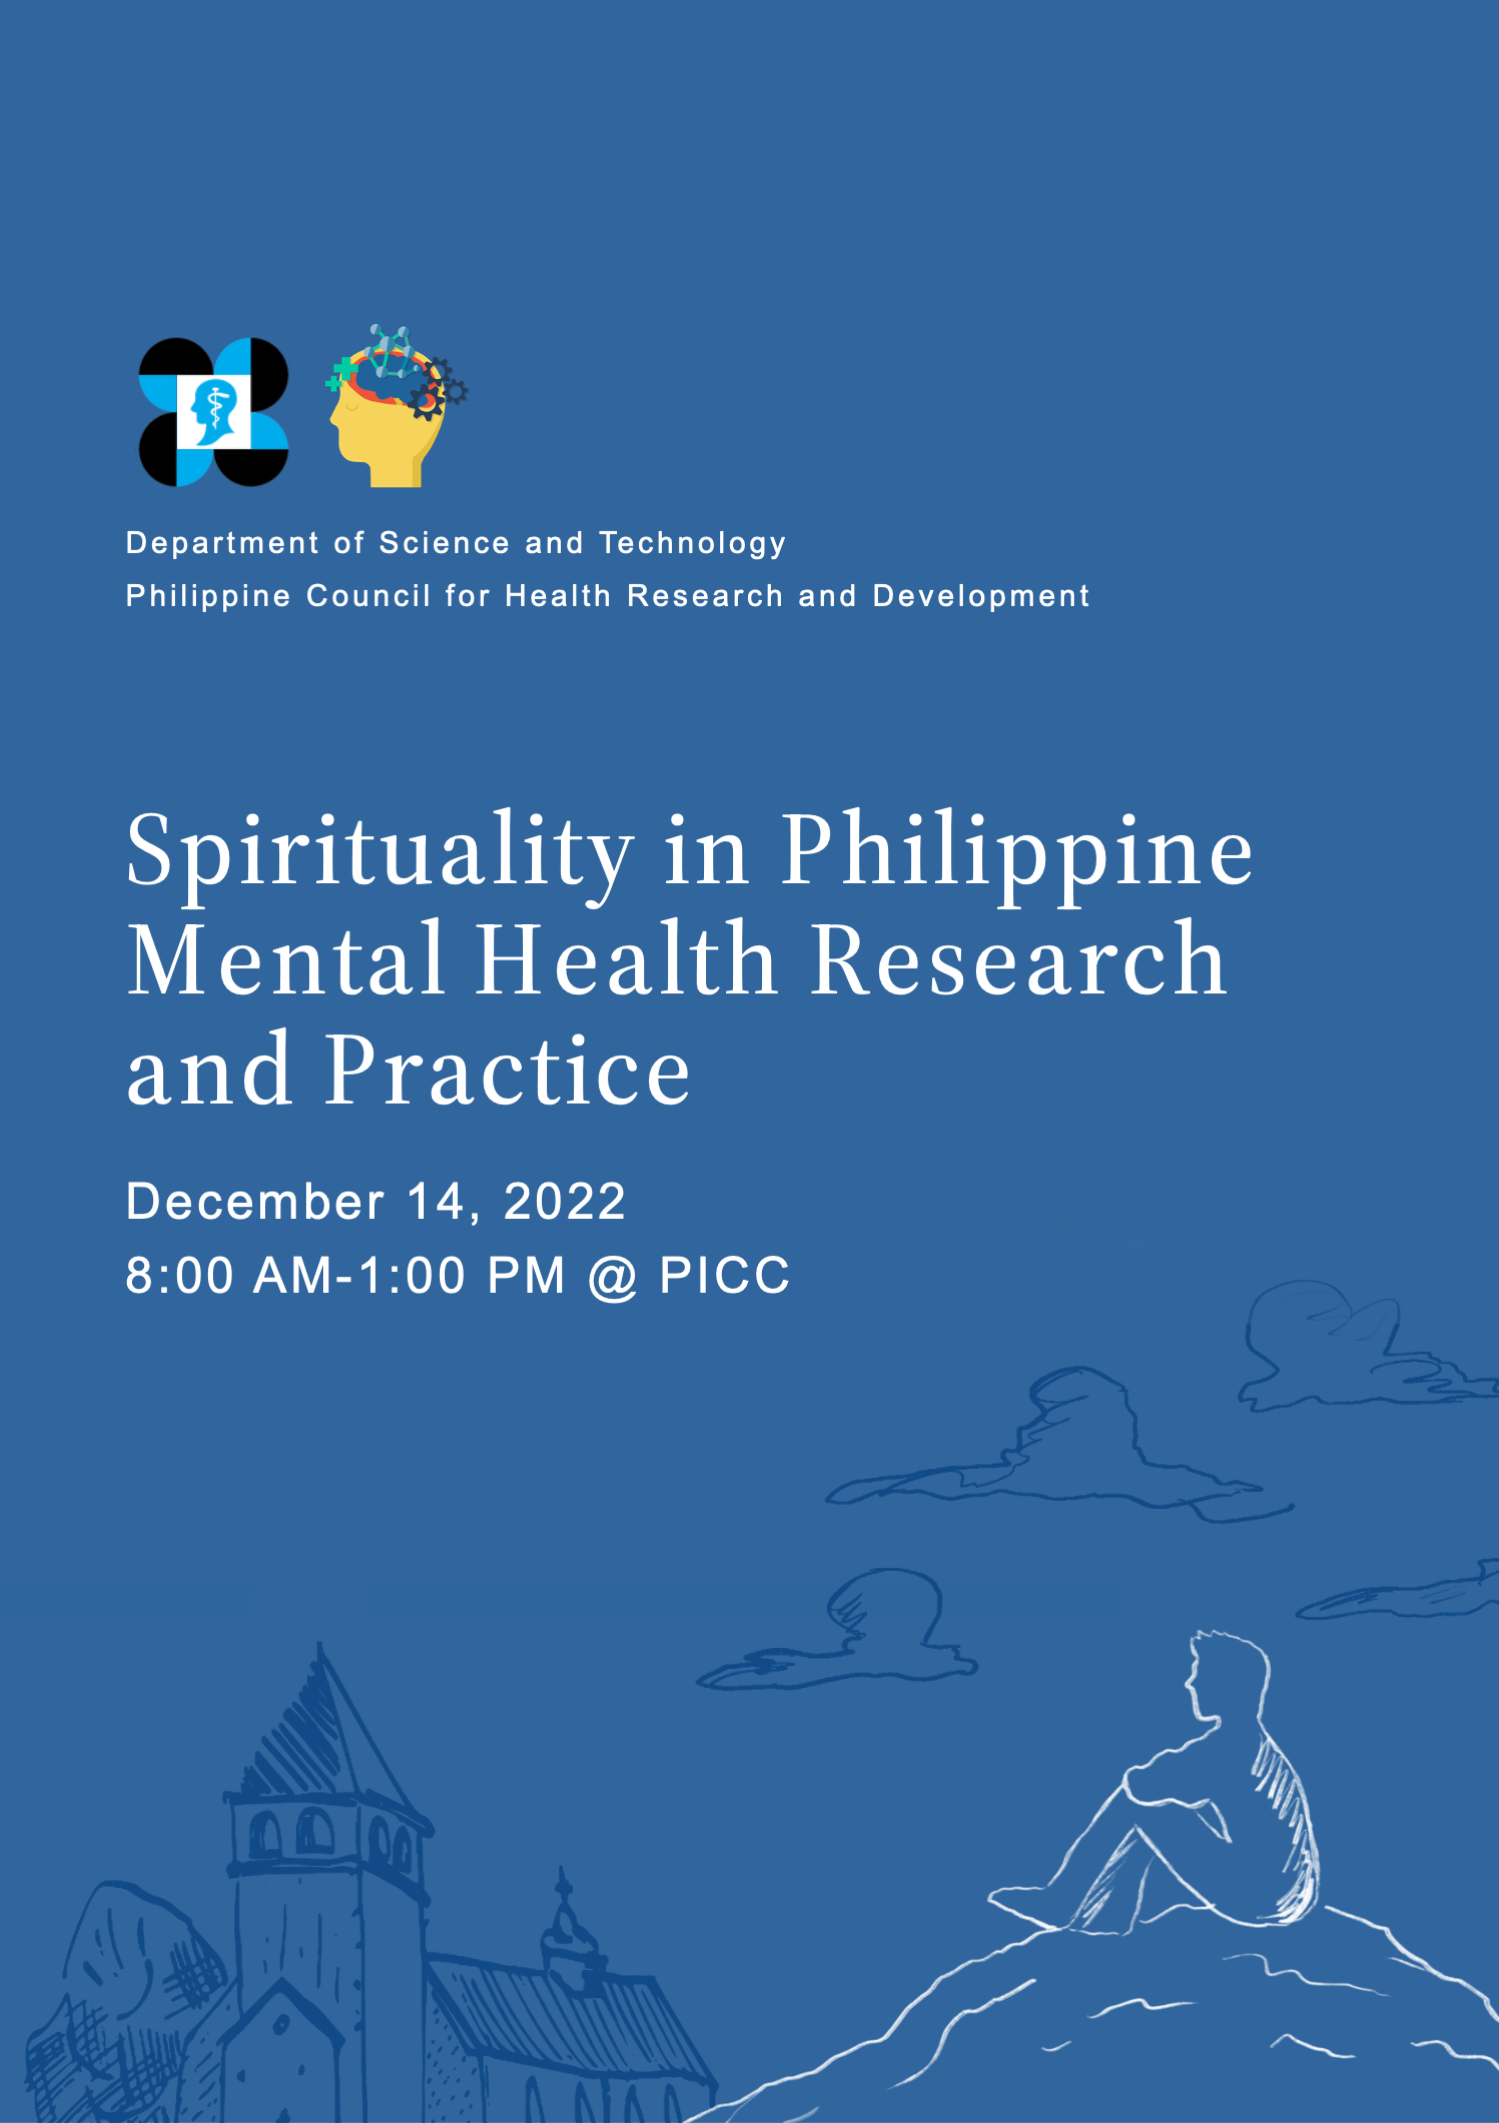 DOST-PCHRD to hold a public forum on spirituality in mental health research